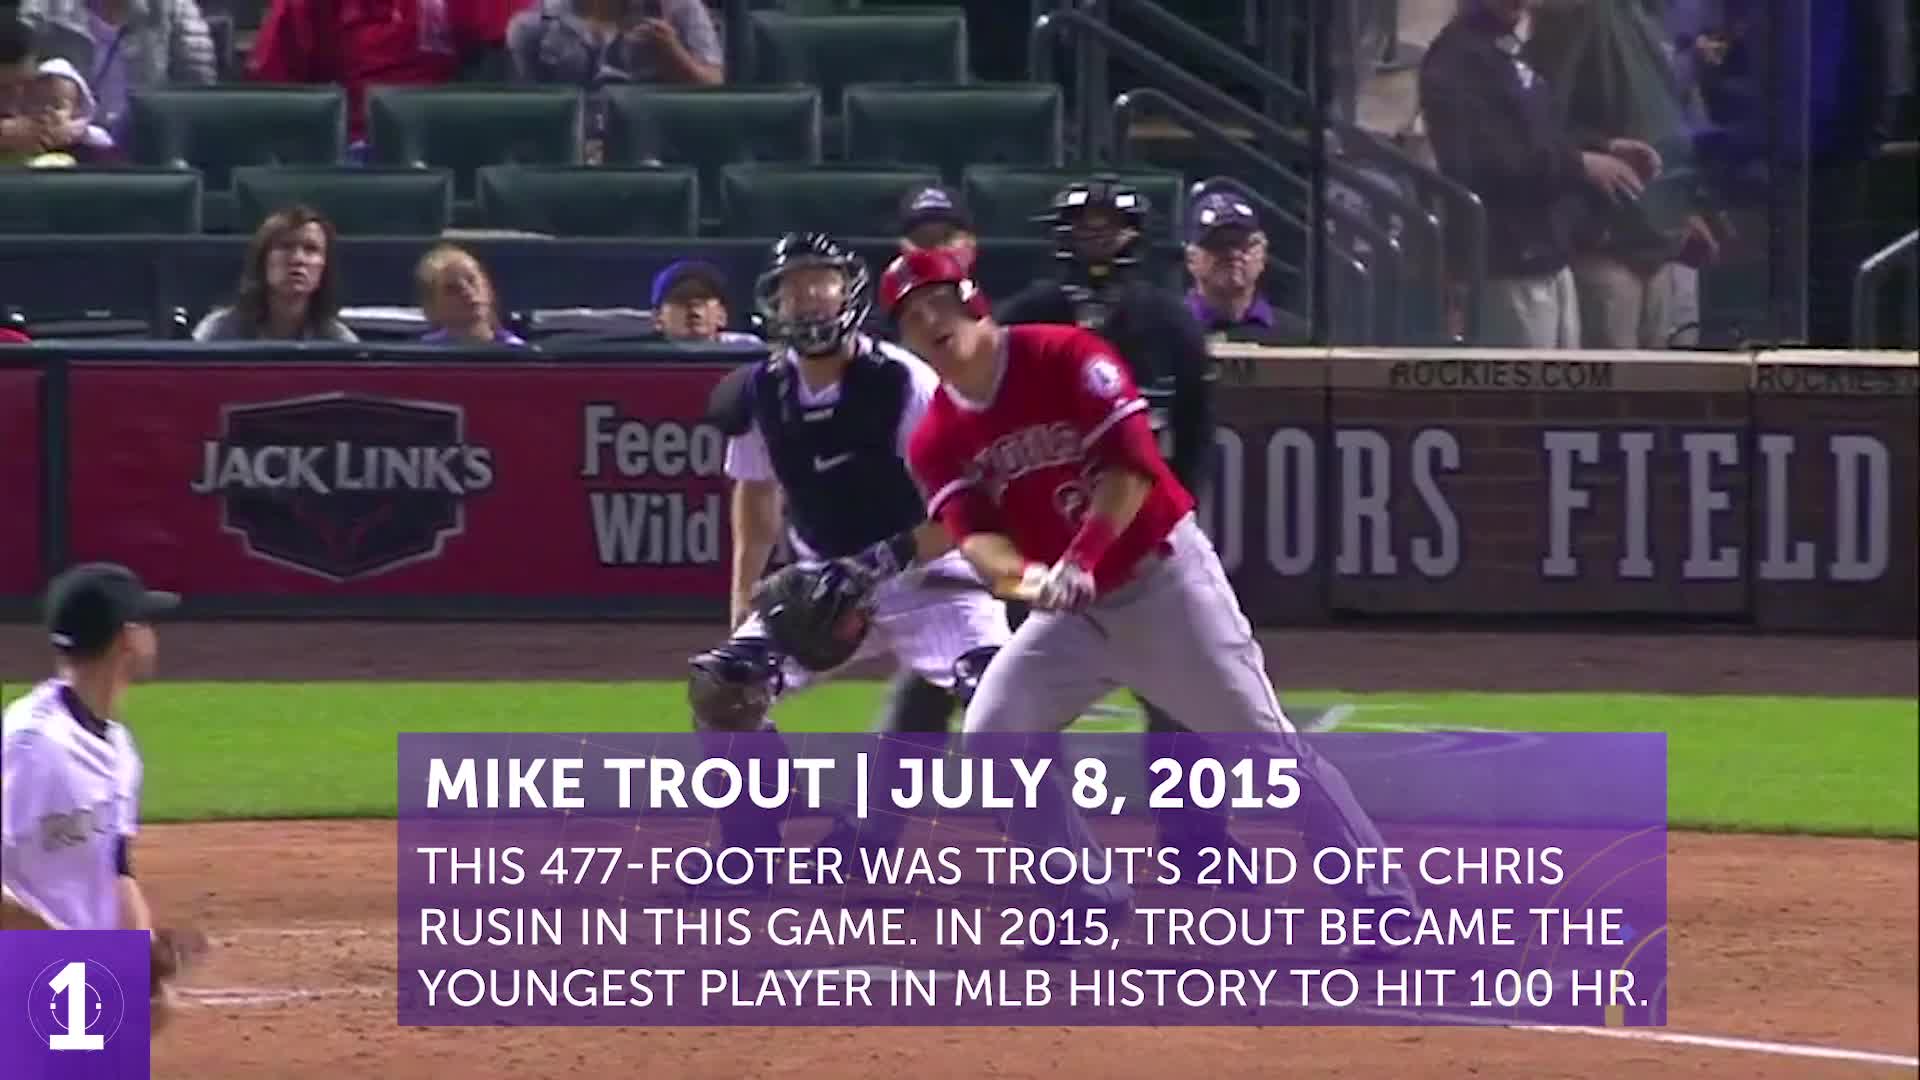 PUTTING JERSEY GUY MIKE TROUT'S GREATNESS INTO PERSPECTIVE!